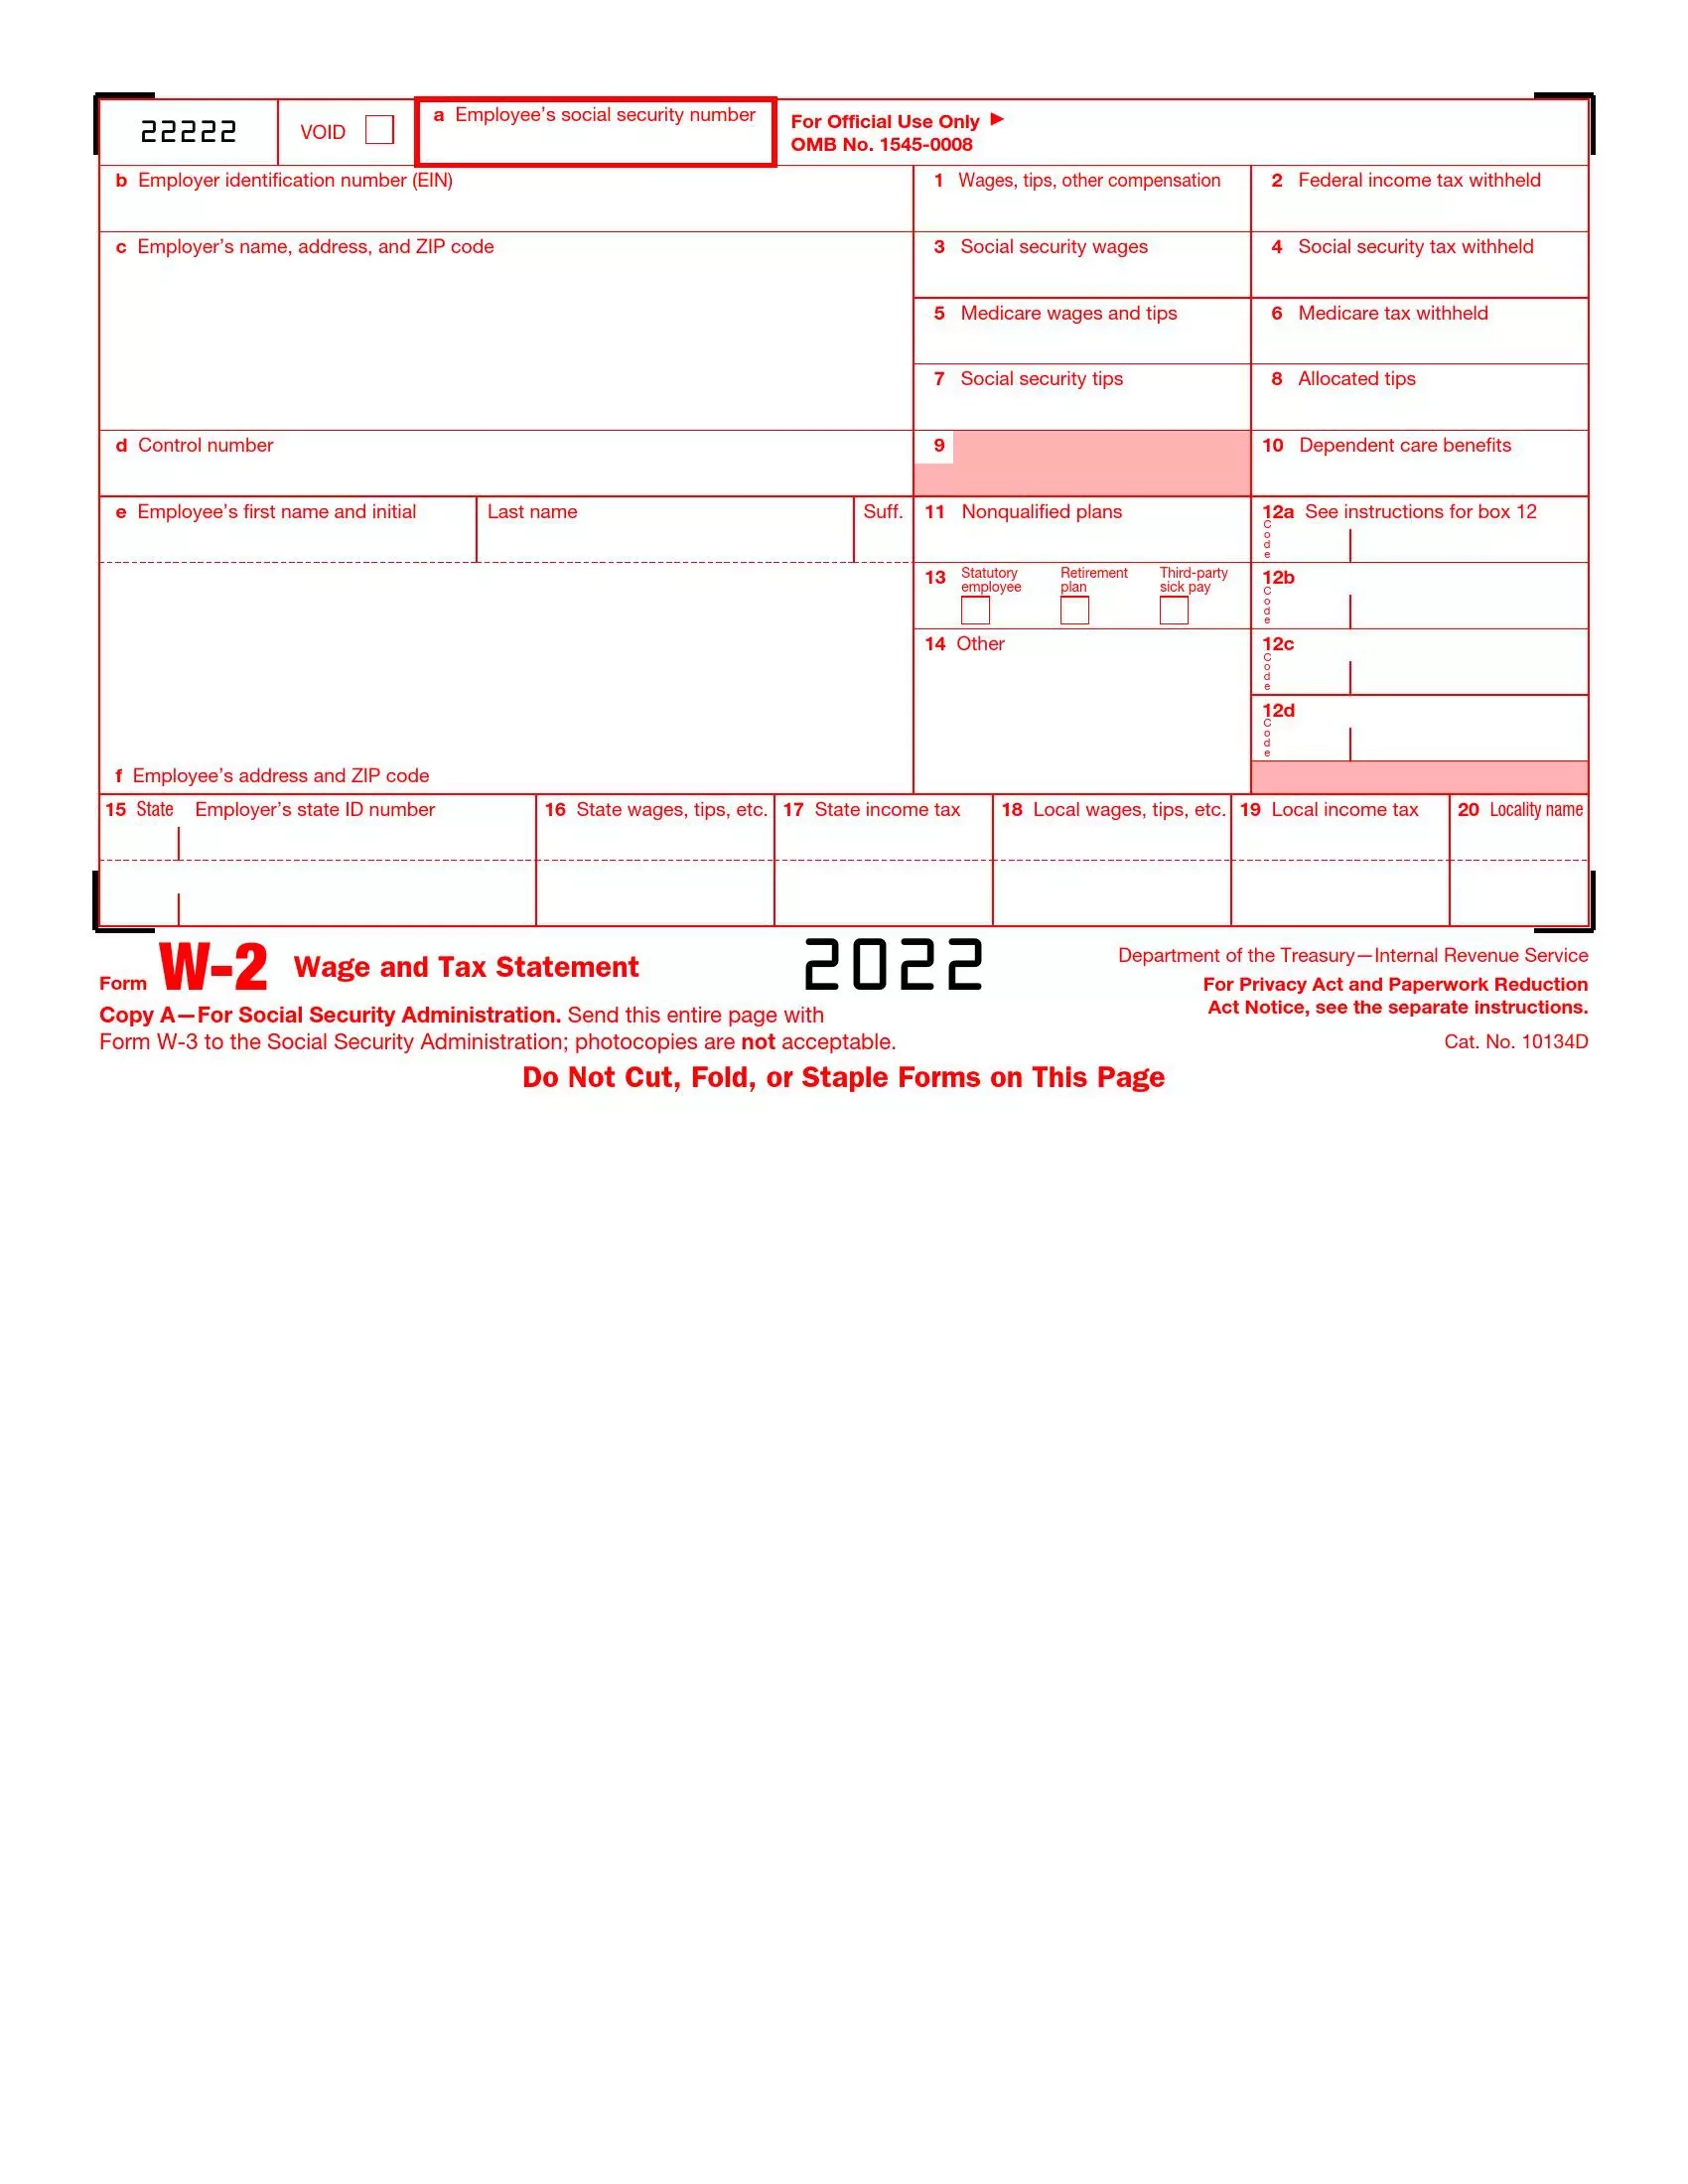 Irs Form W-2 ≡ Fill Out Printable Pdf Forms Online within W2 Tax Form 2022